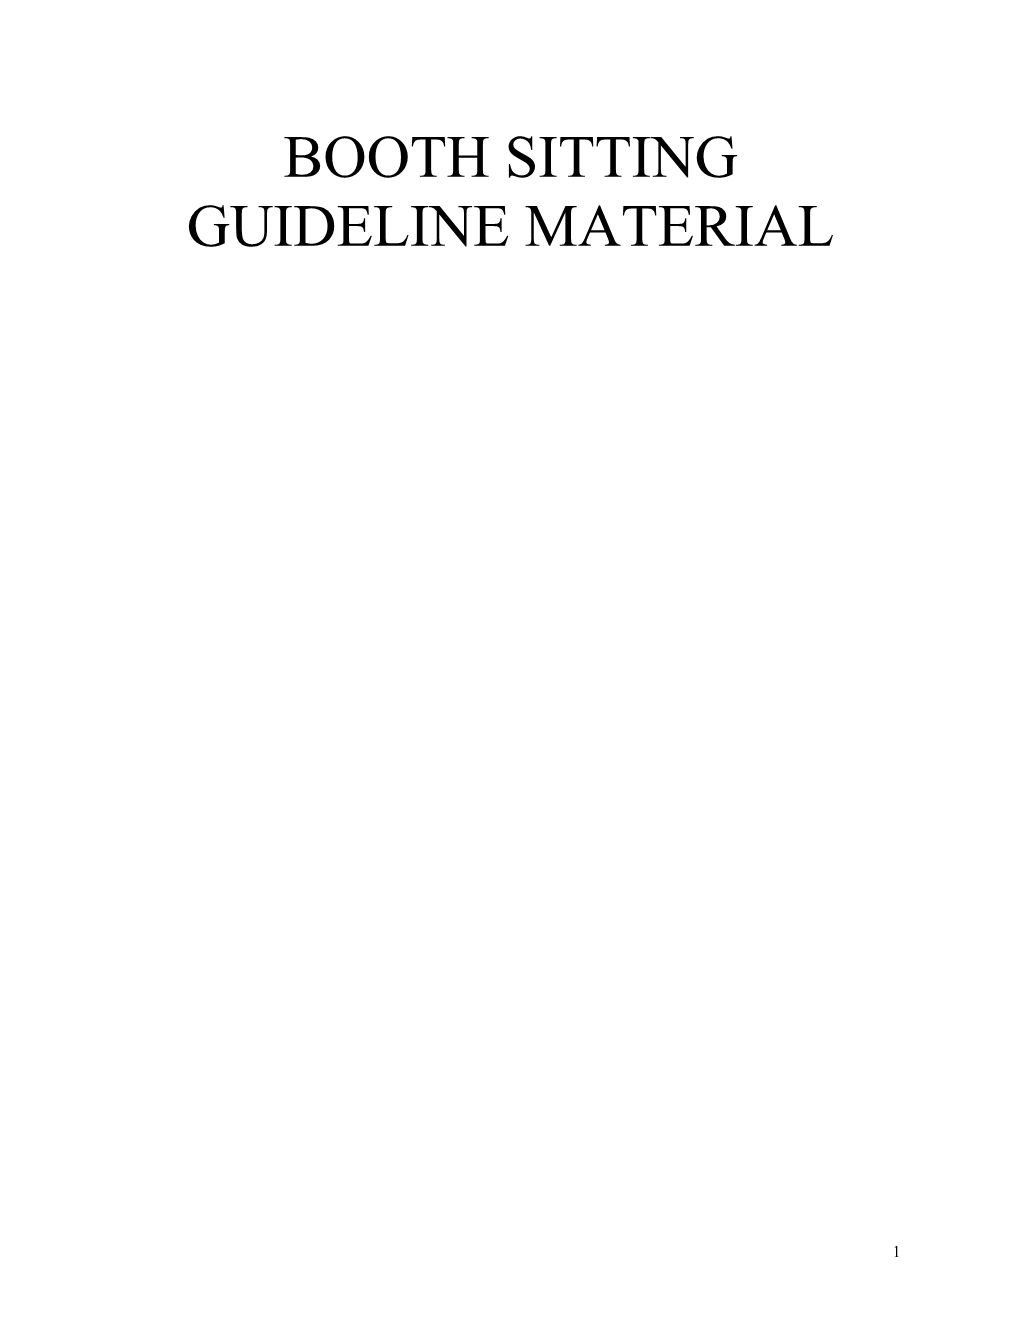 Booth Sitting Guideline Material